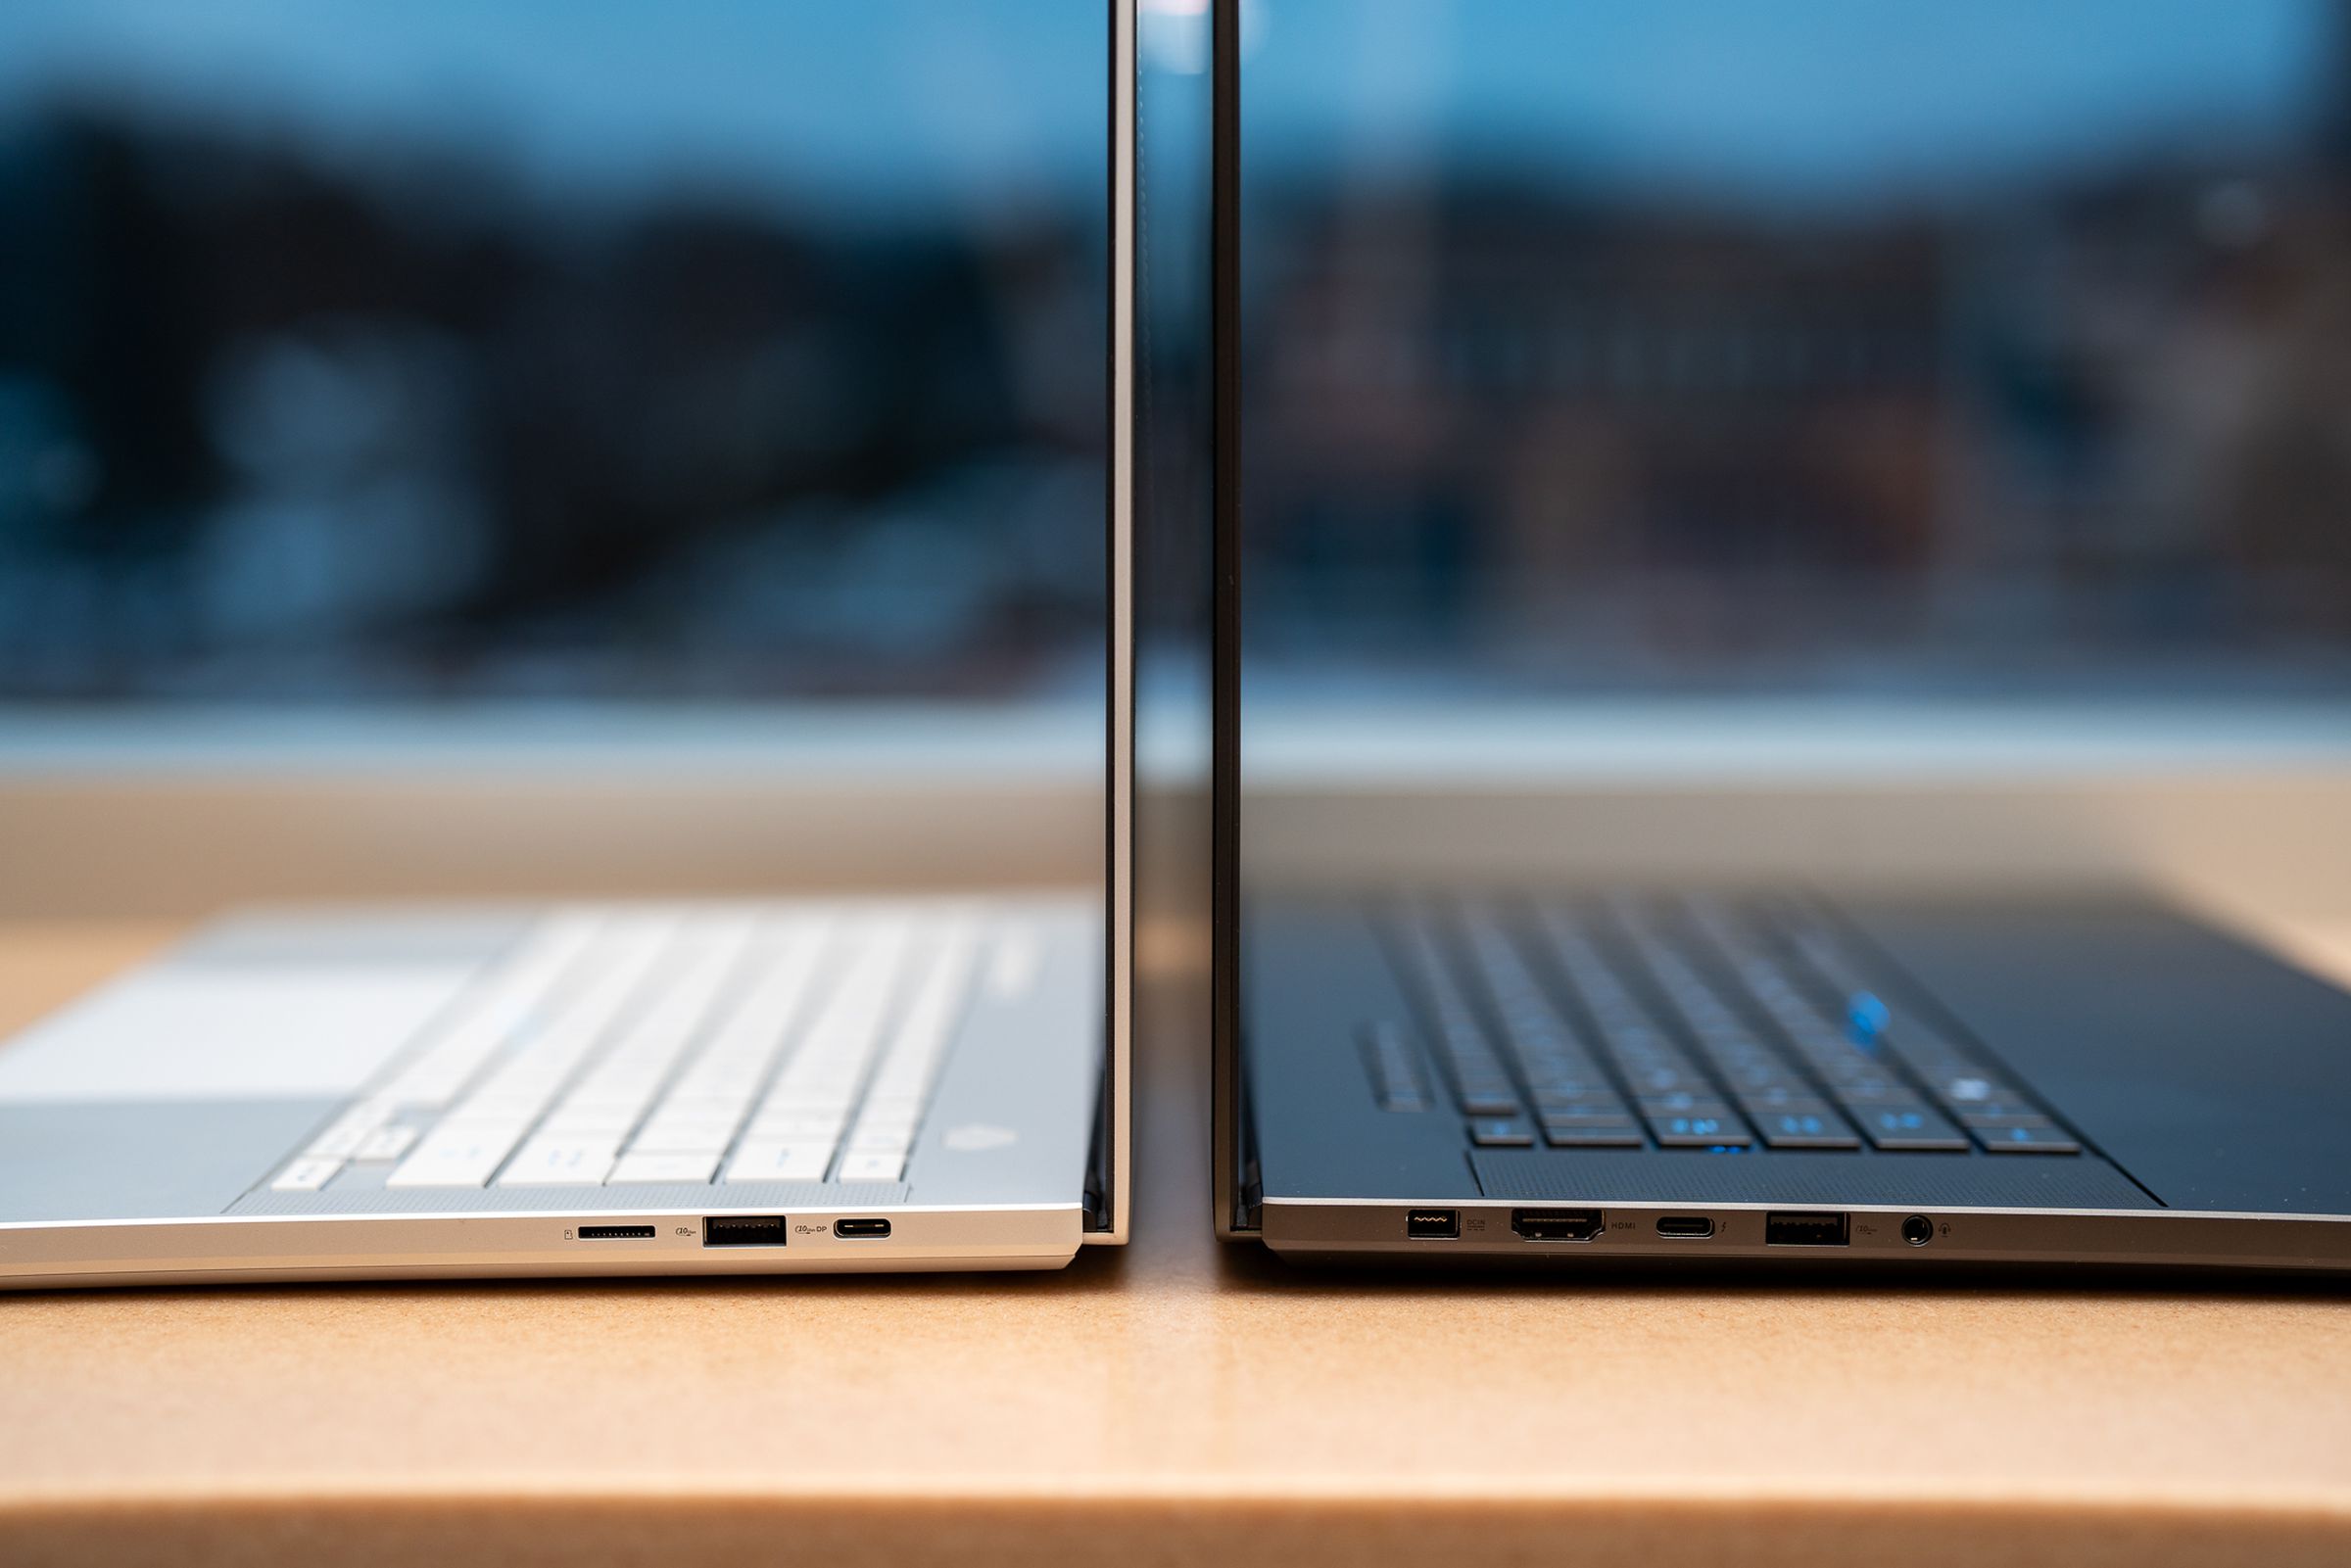 The new hinge design goes a long way in making these laptops feel and look more premium than prior models.